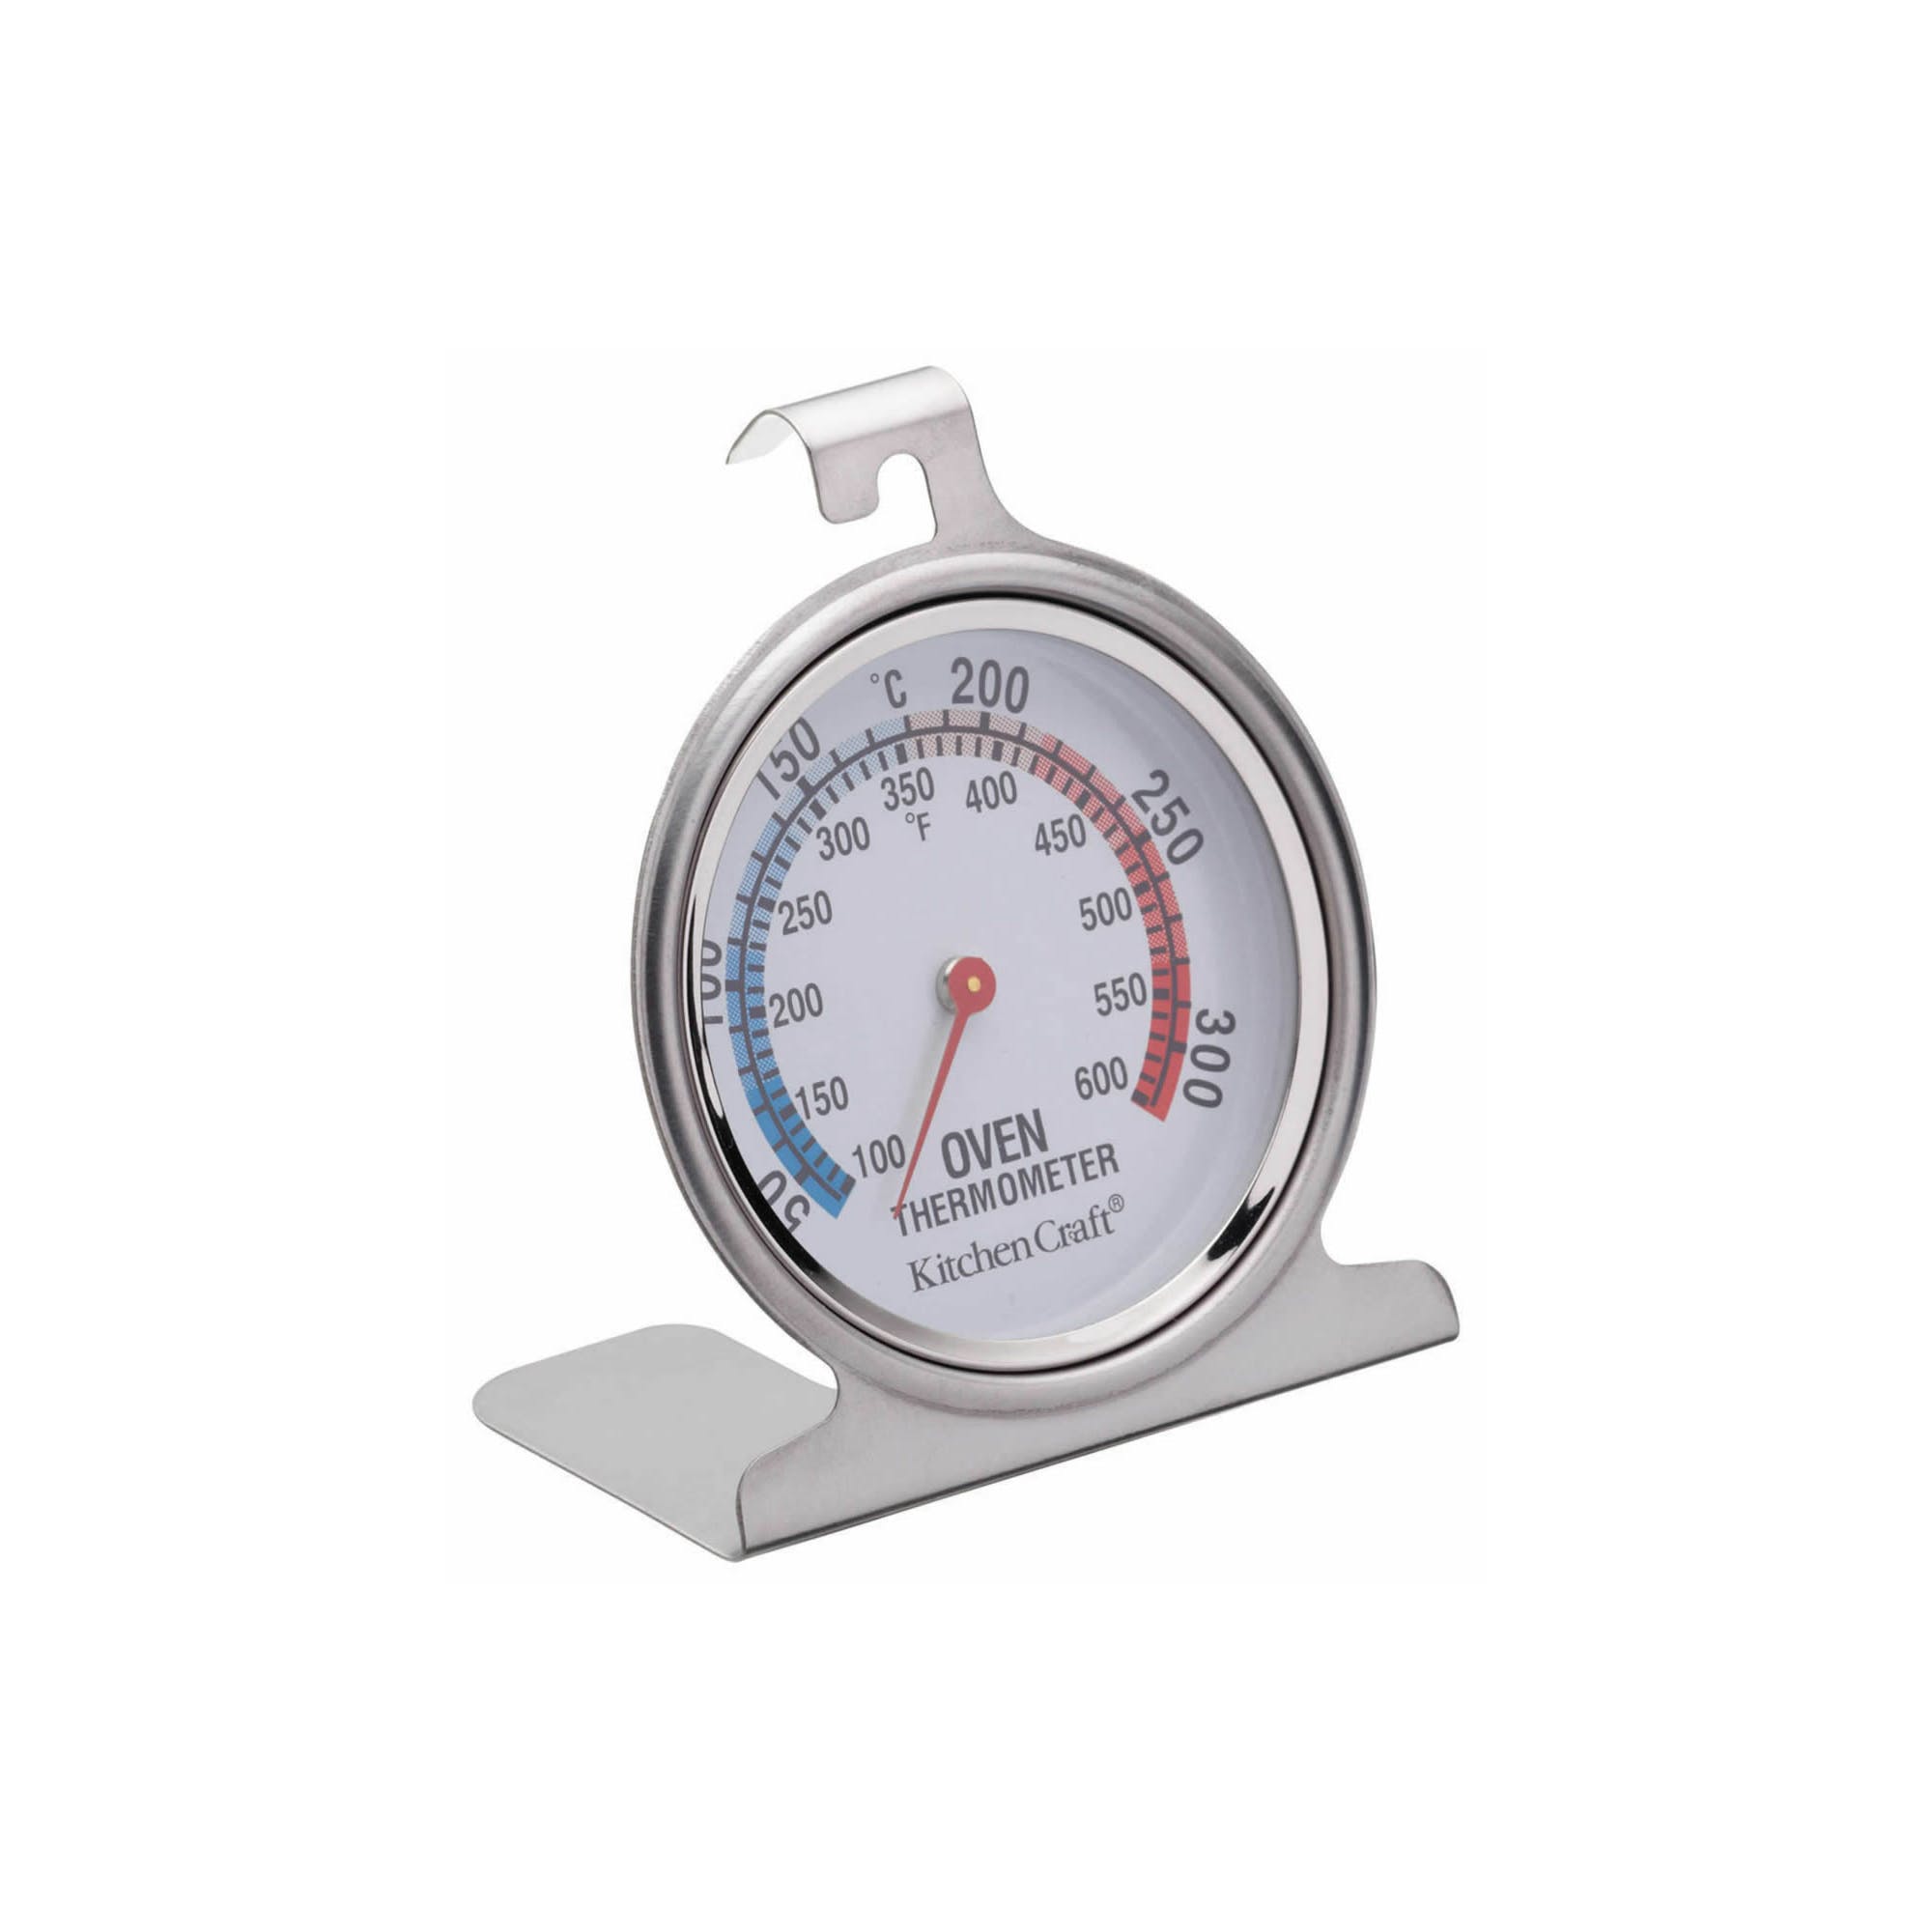 KitchenCraft Stainless Steel Oven Thermometer - The Cooks Cupboard Ltd